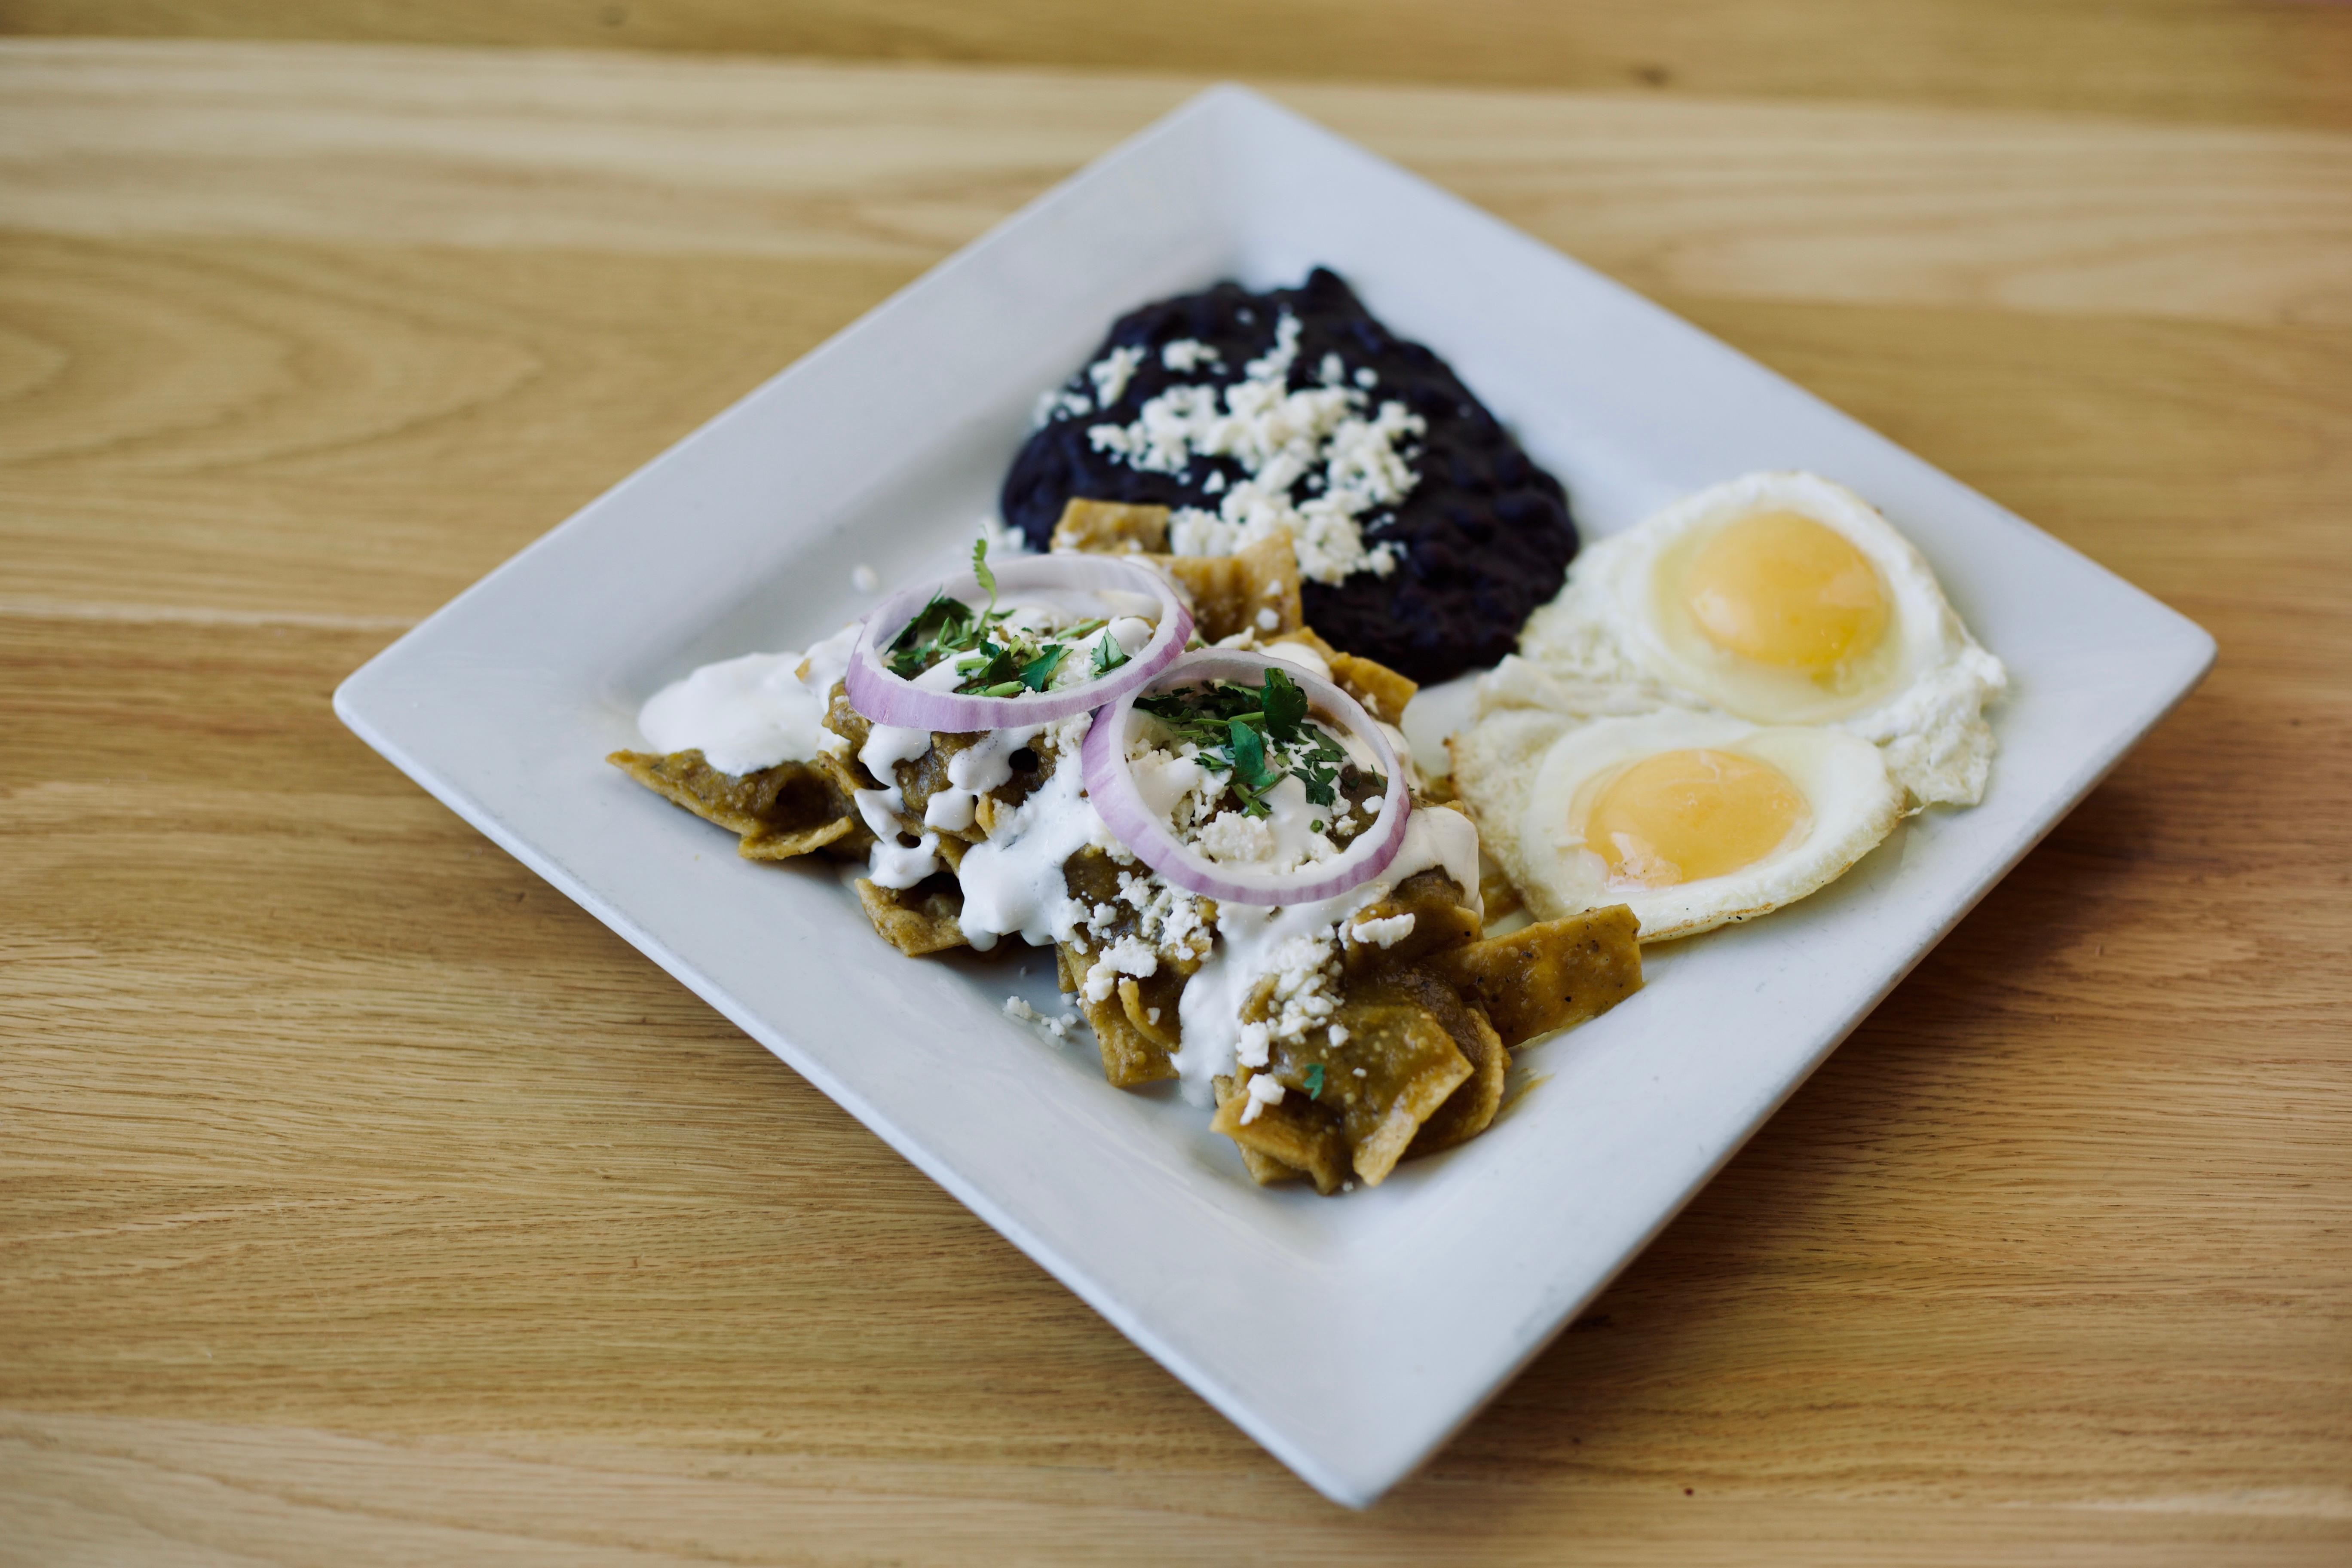 CHILAQUILES MEXICANOS